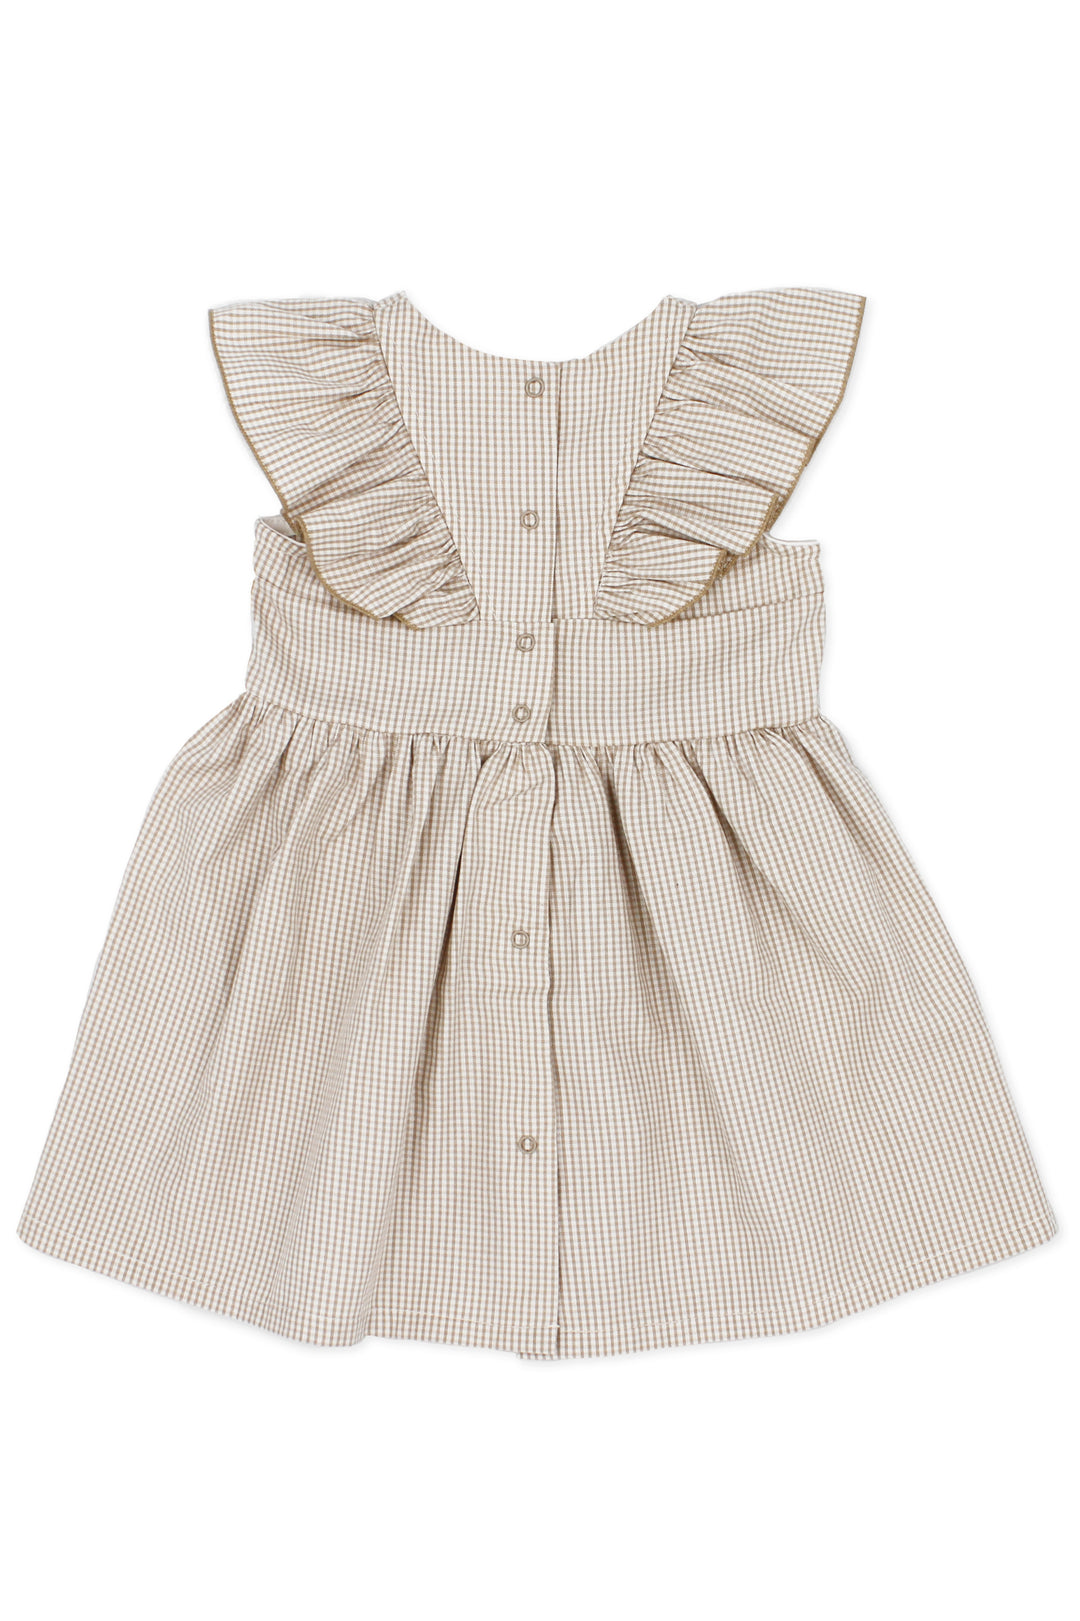 Rapife "India" Beige Checked Dress | Millie and John